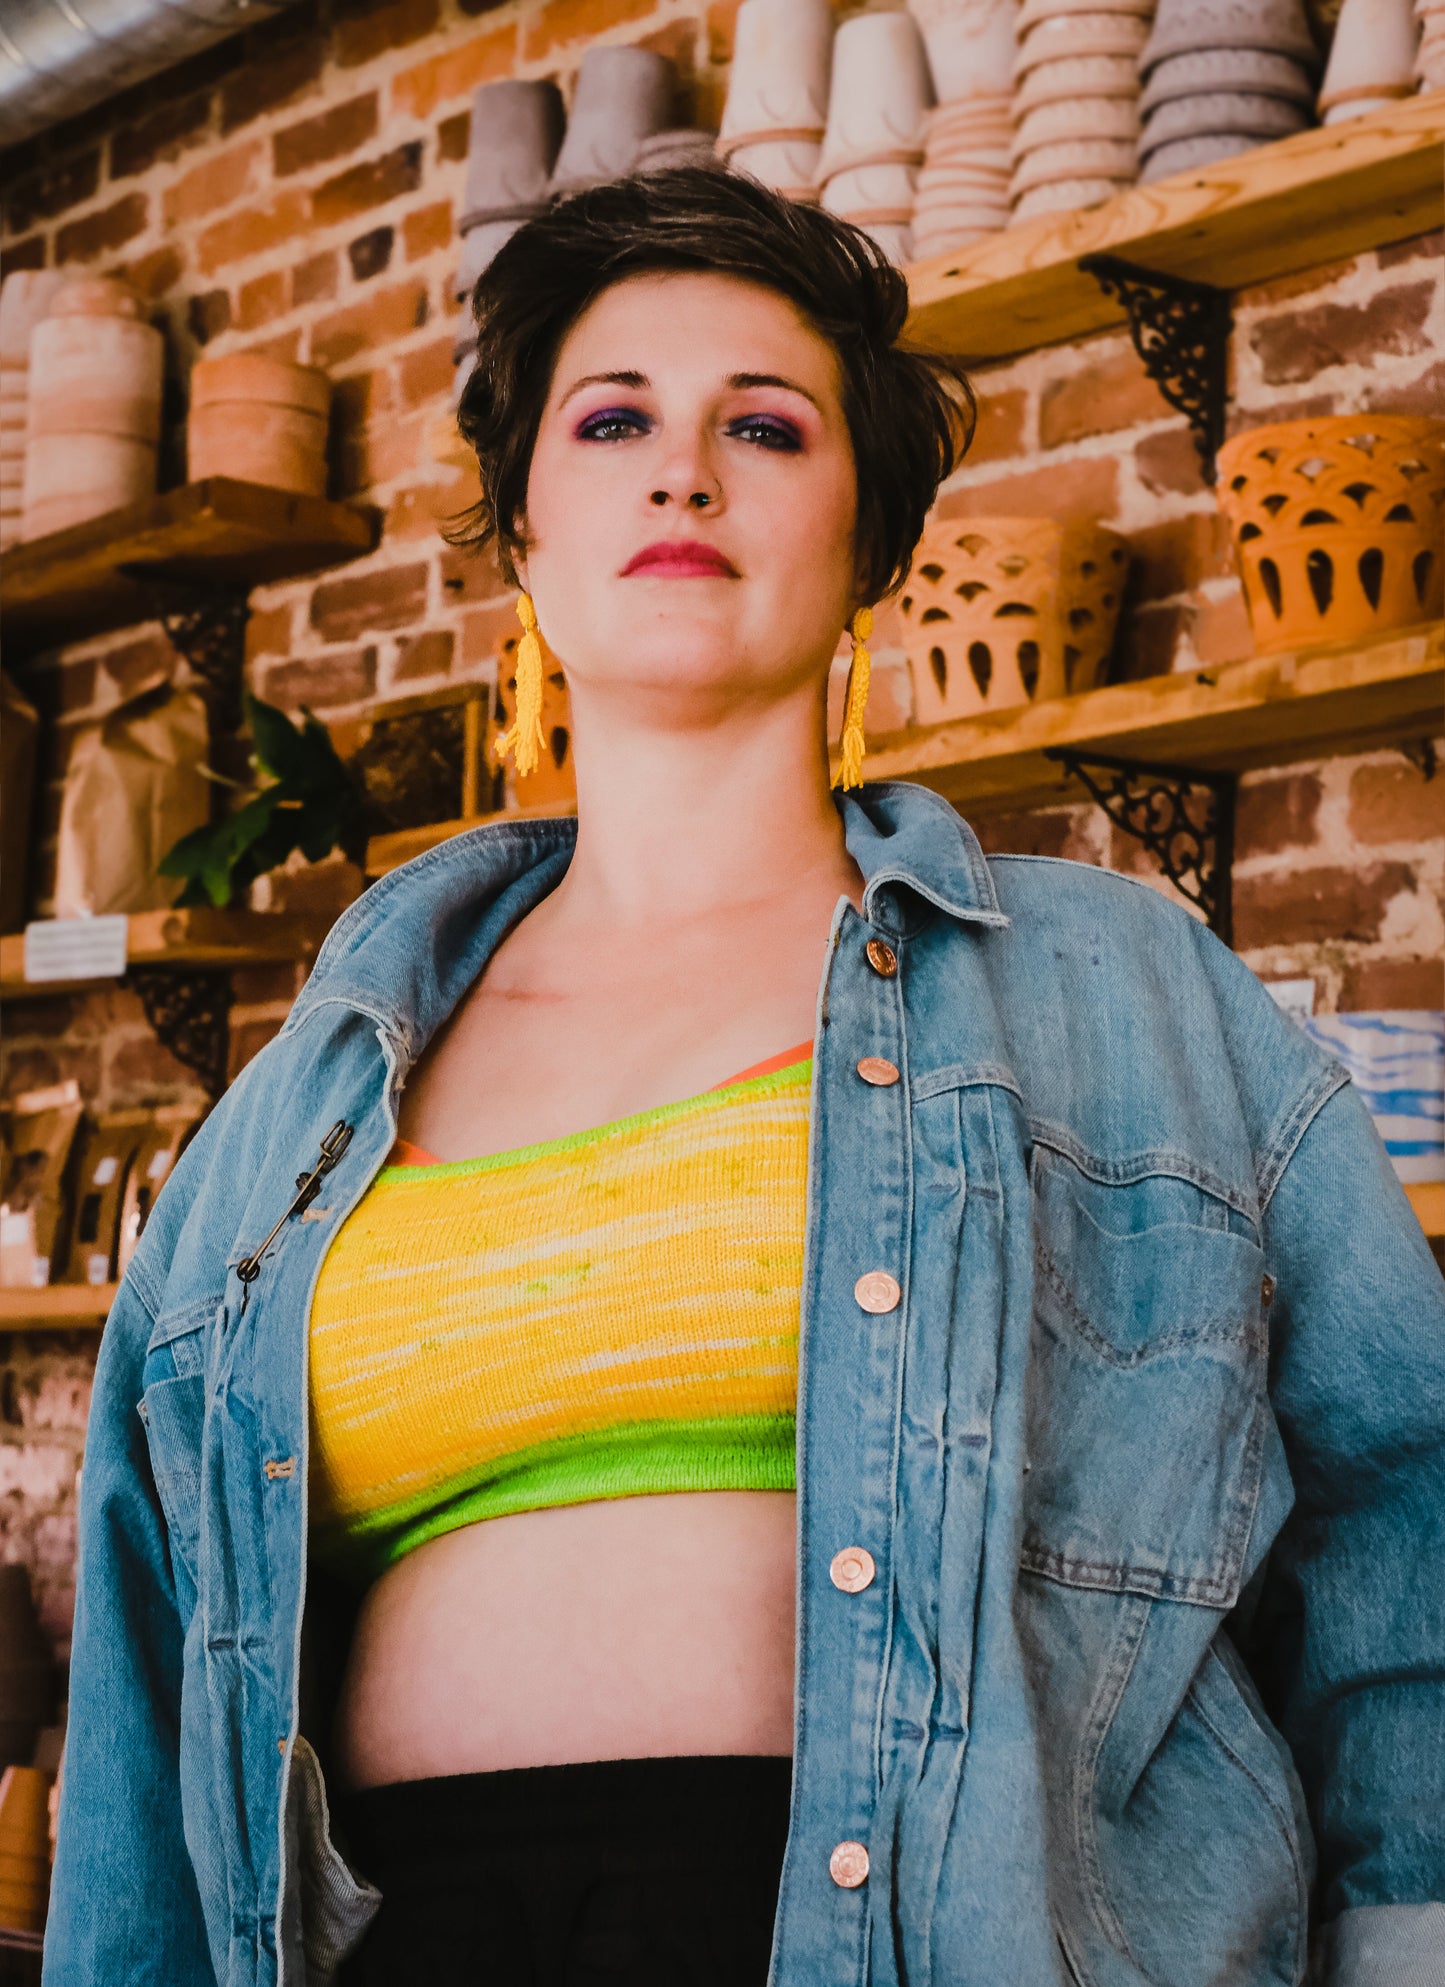 Jen looks down at the camera, wearing a denim jacket and black leggings with a hand knit bralette. The bralette is made with bright yellow yarn and is knit with a neon green band.